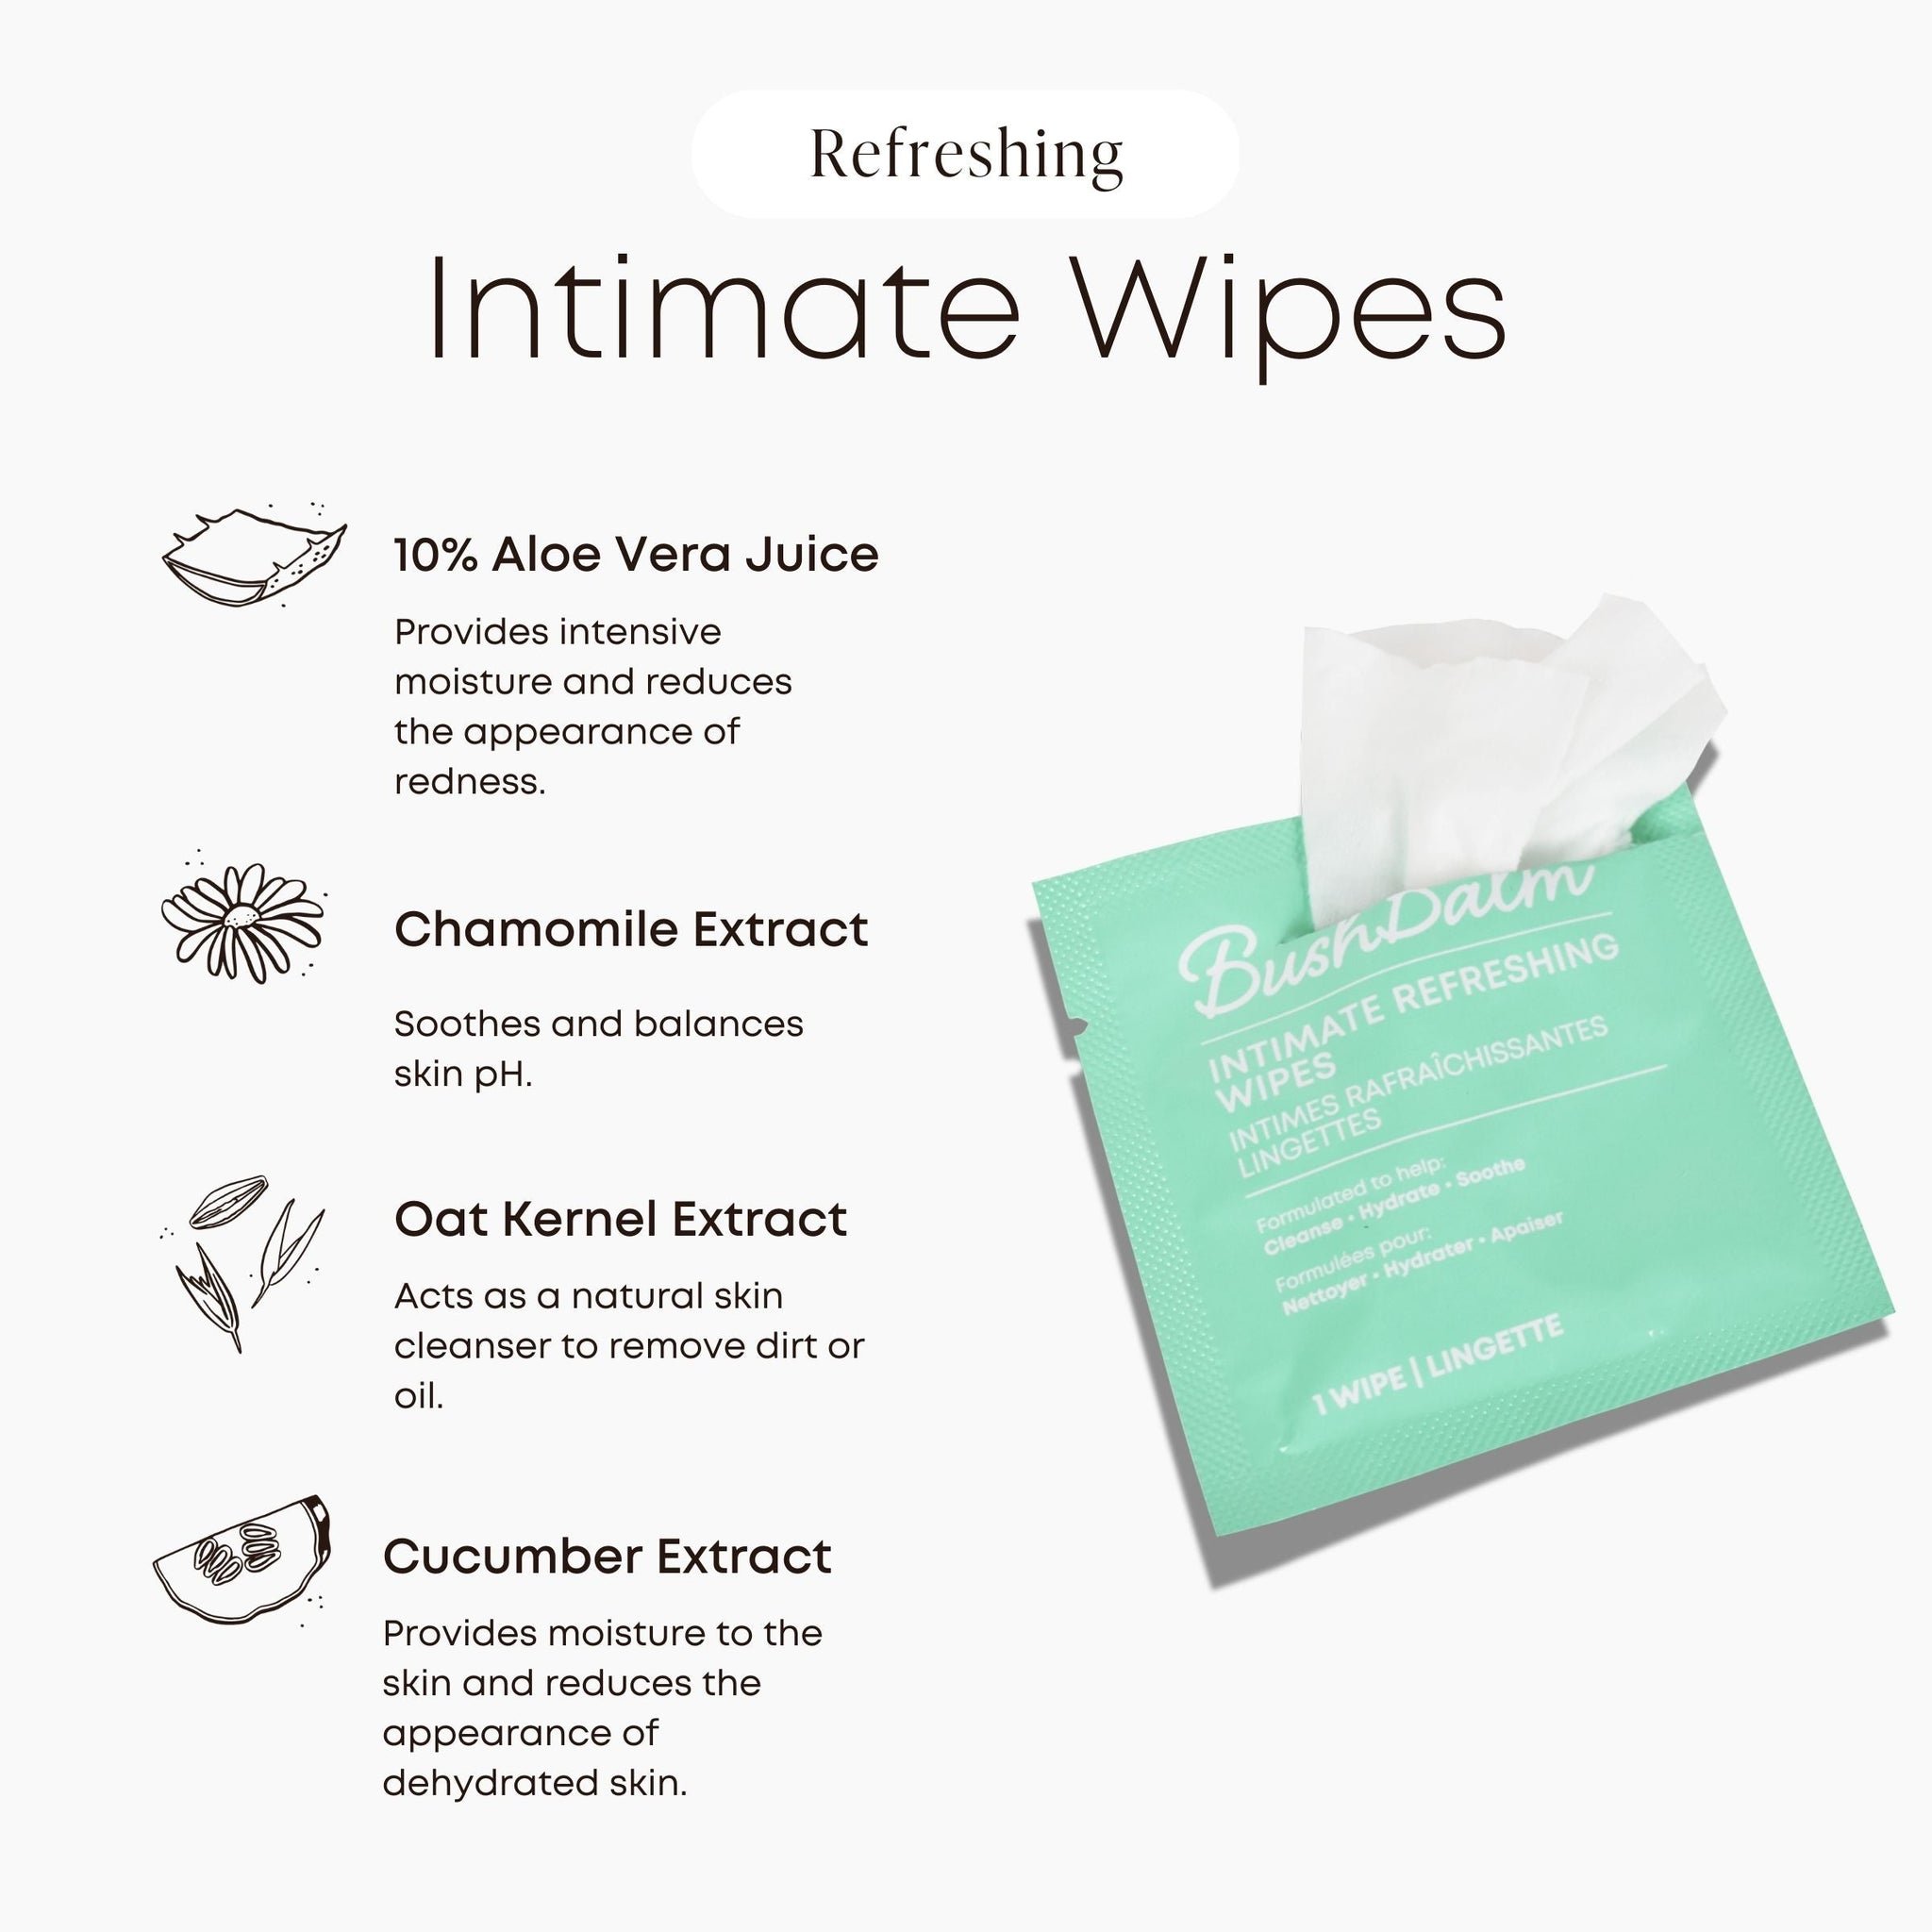 Intimate Wipes Exclusive Offer